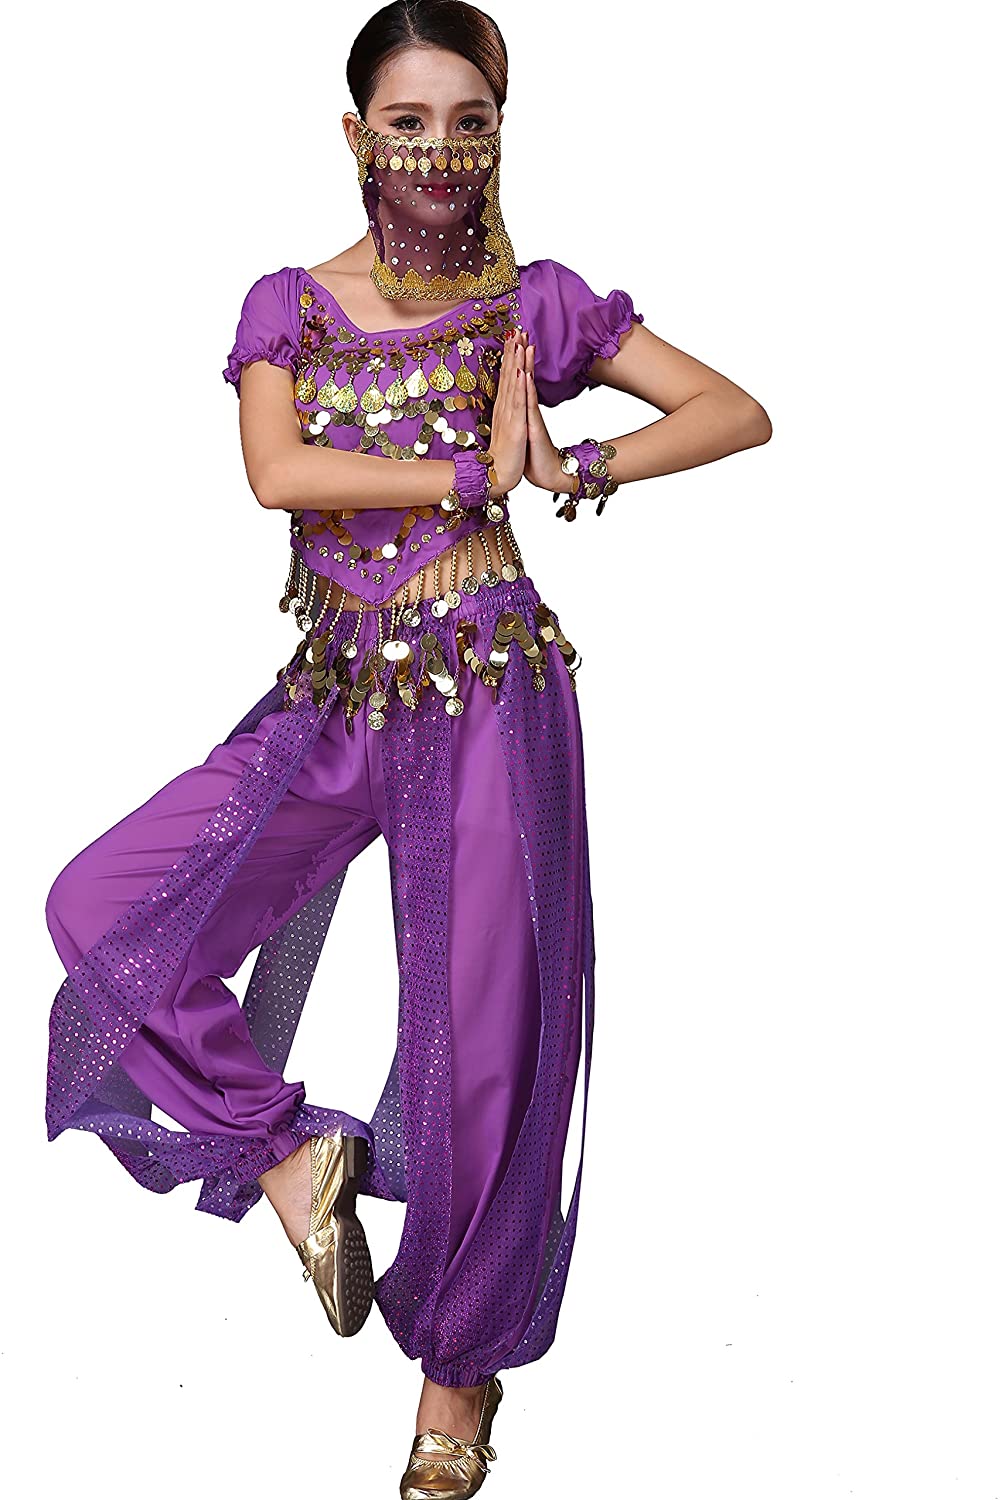 Womens Adult Belly Dancer Costume Halloween Performance Wear All Sets | Decor Gifts and More